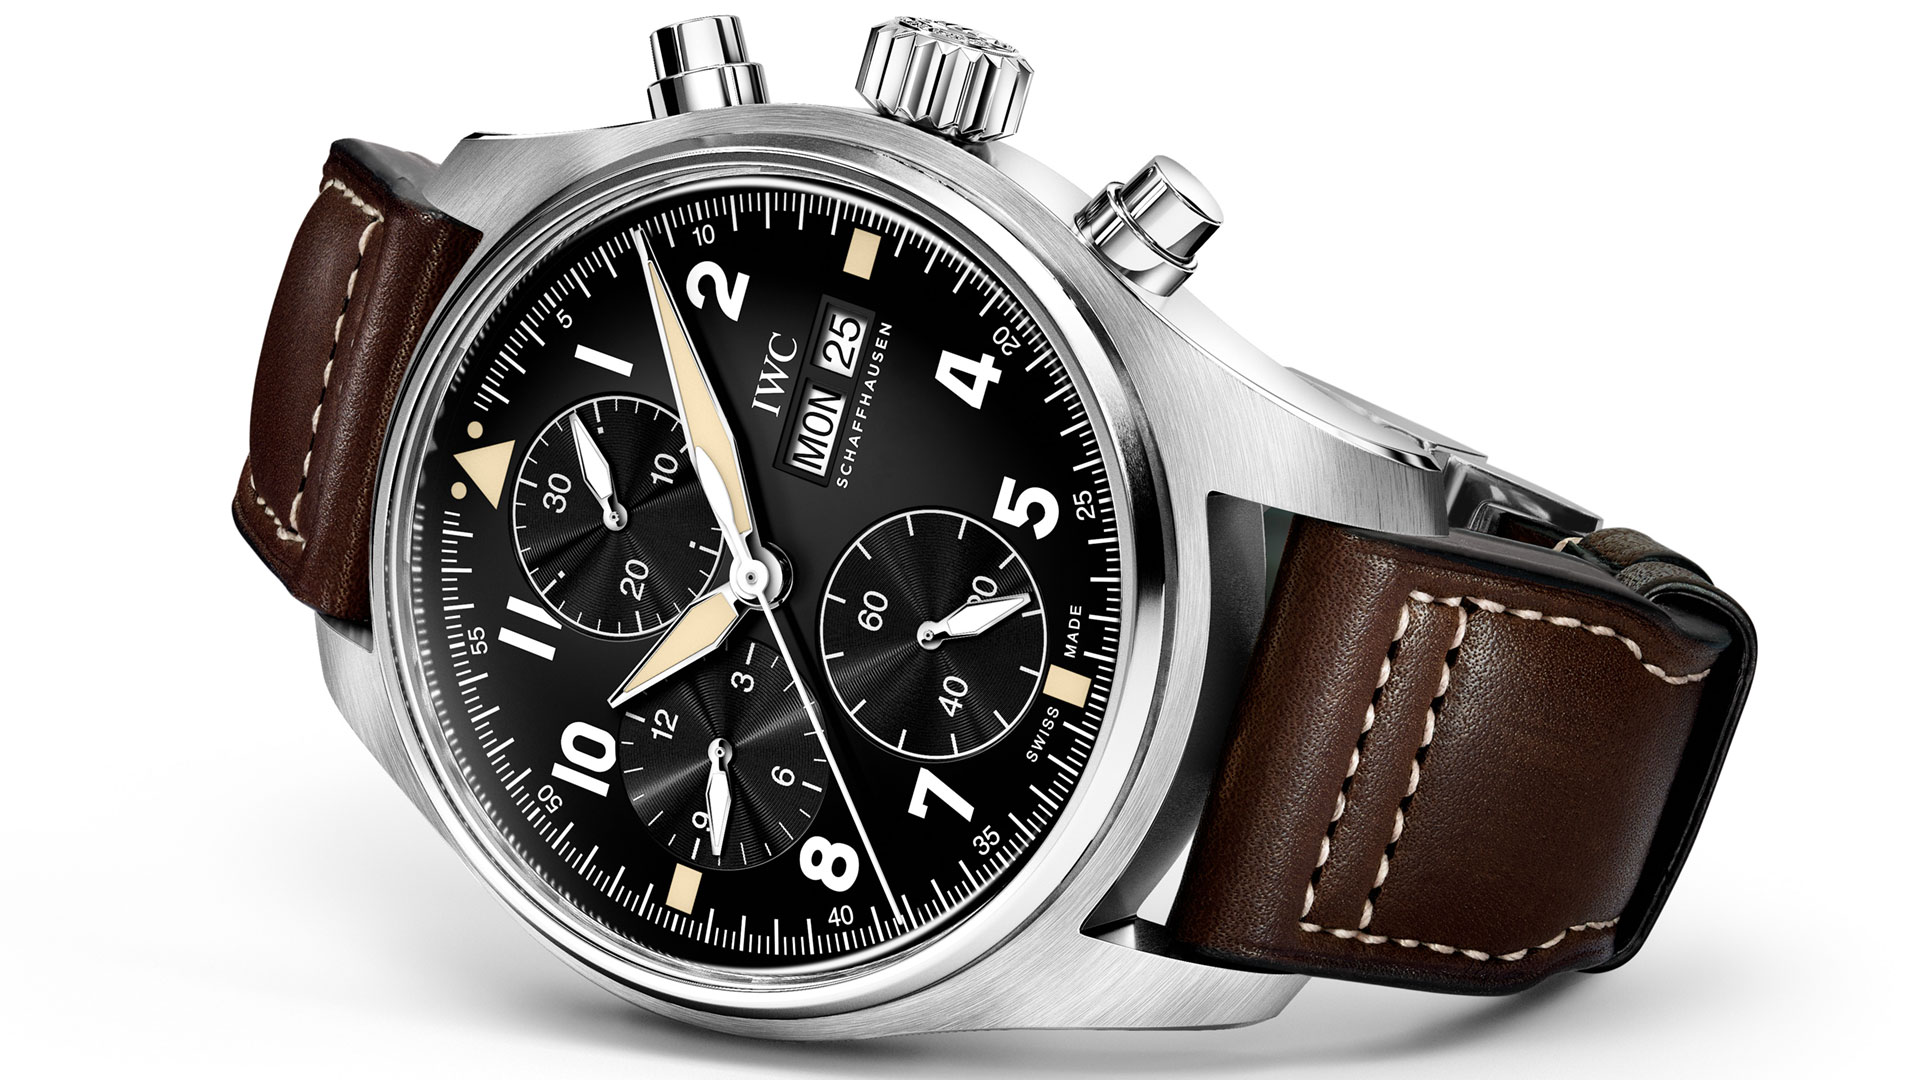 IWC Pilot’s Watch Spitfire Collection For SIHH 2019 | aBlogtoWatch